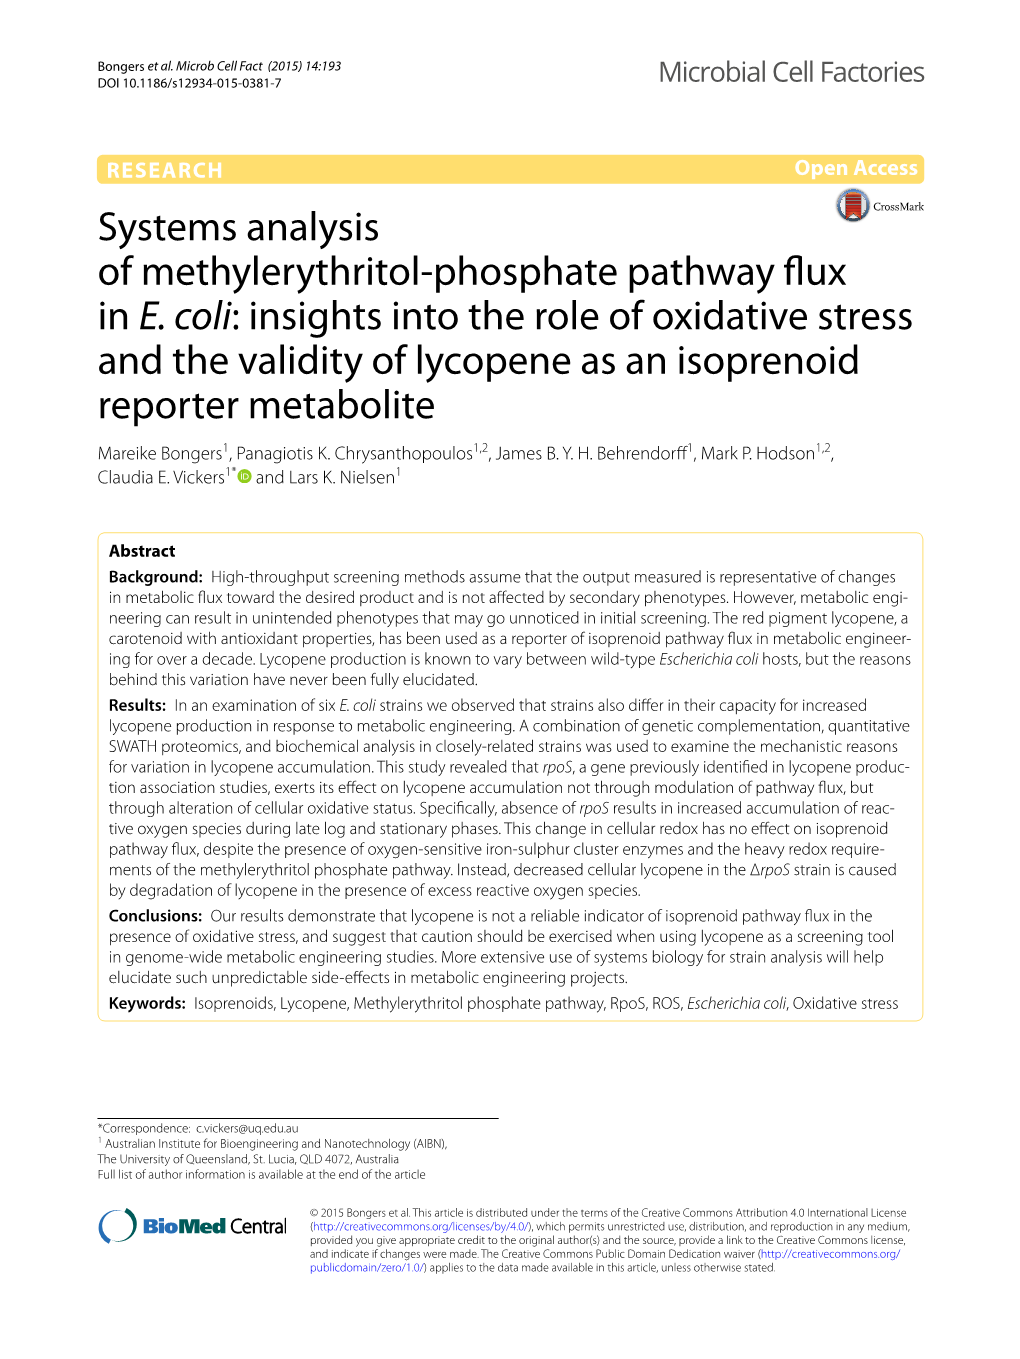 Systems Analysis of Methylerythritol‑Phosphate Pathway Flux in E